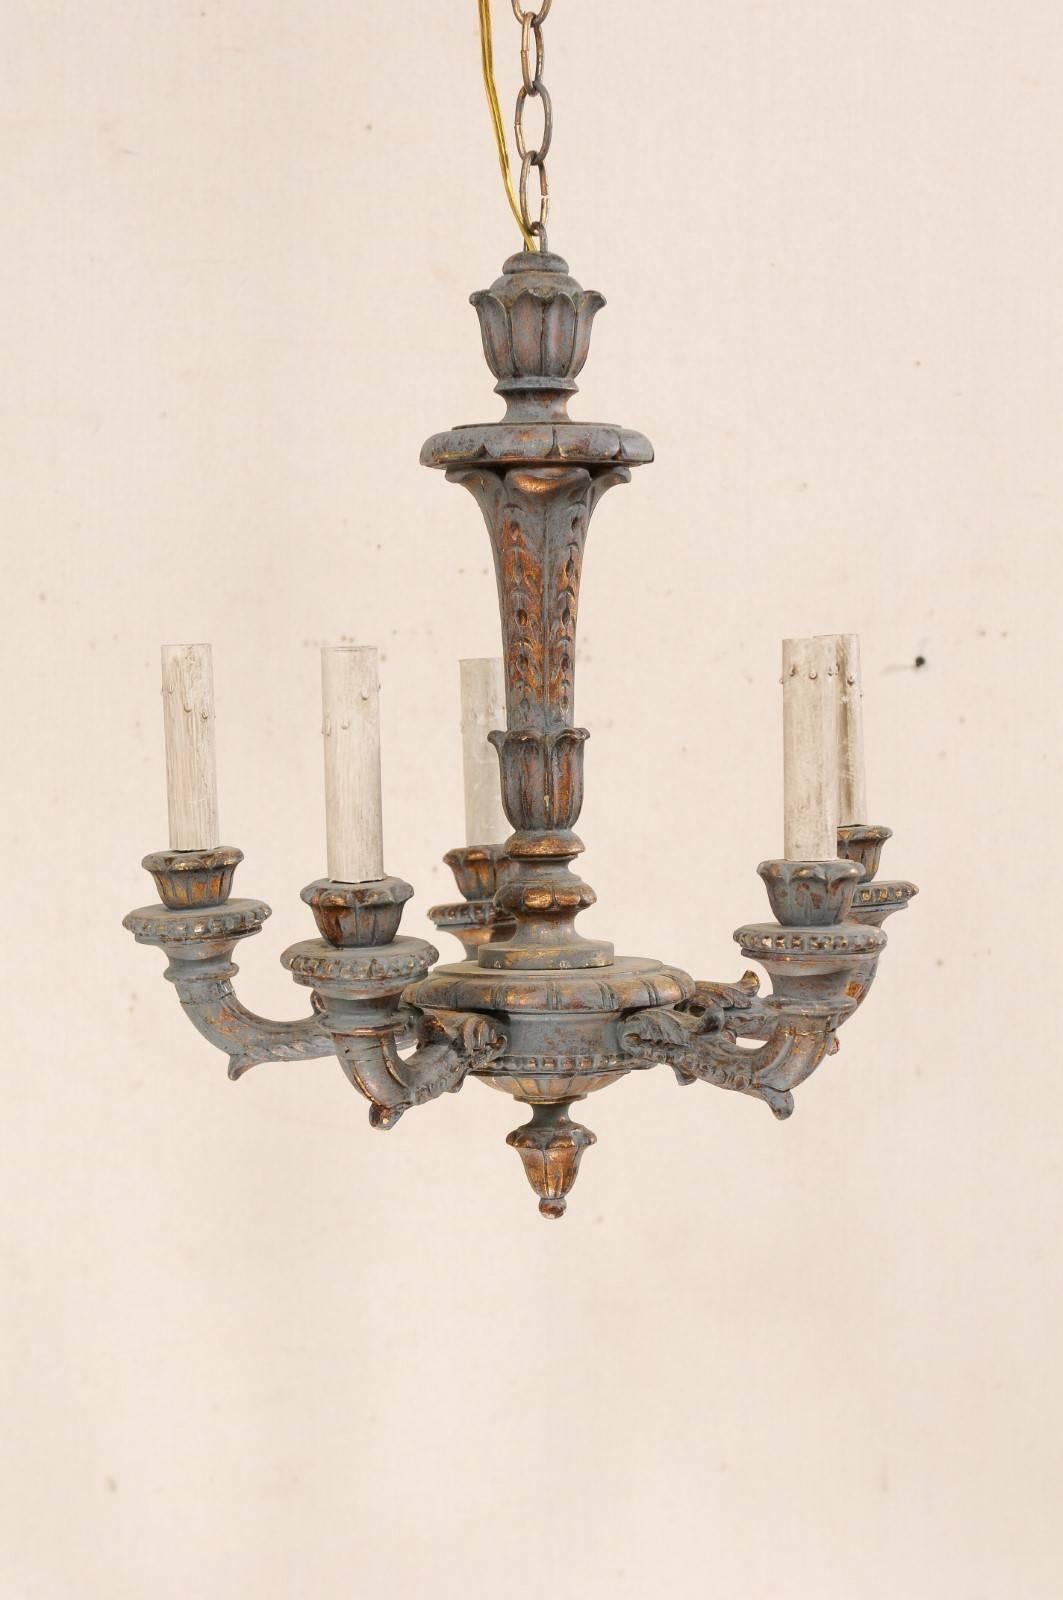 20th Century French 5-Light Painted and Carved Wood Chandelier in Grey-Blue with Gold Accents